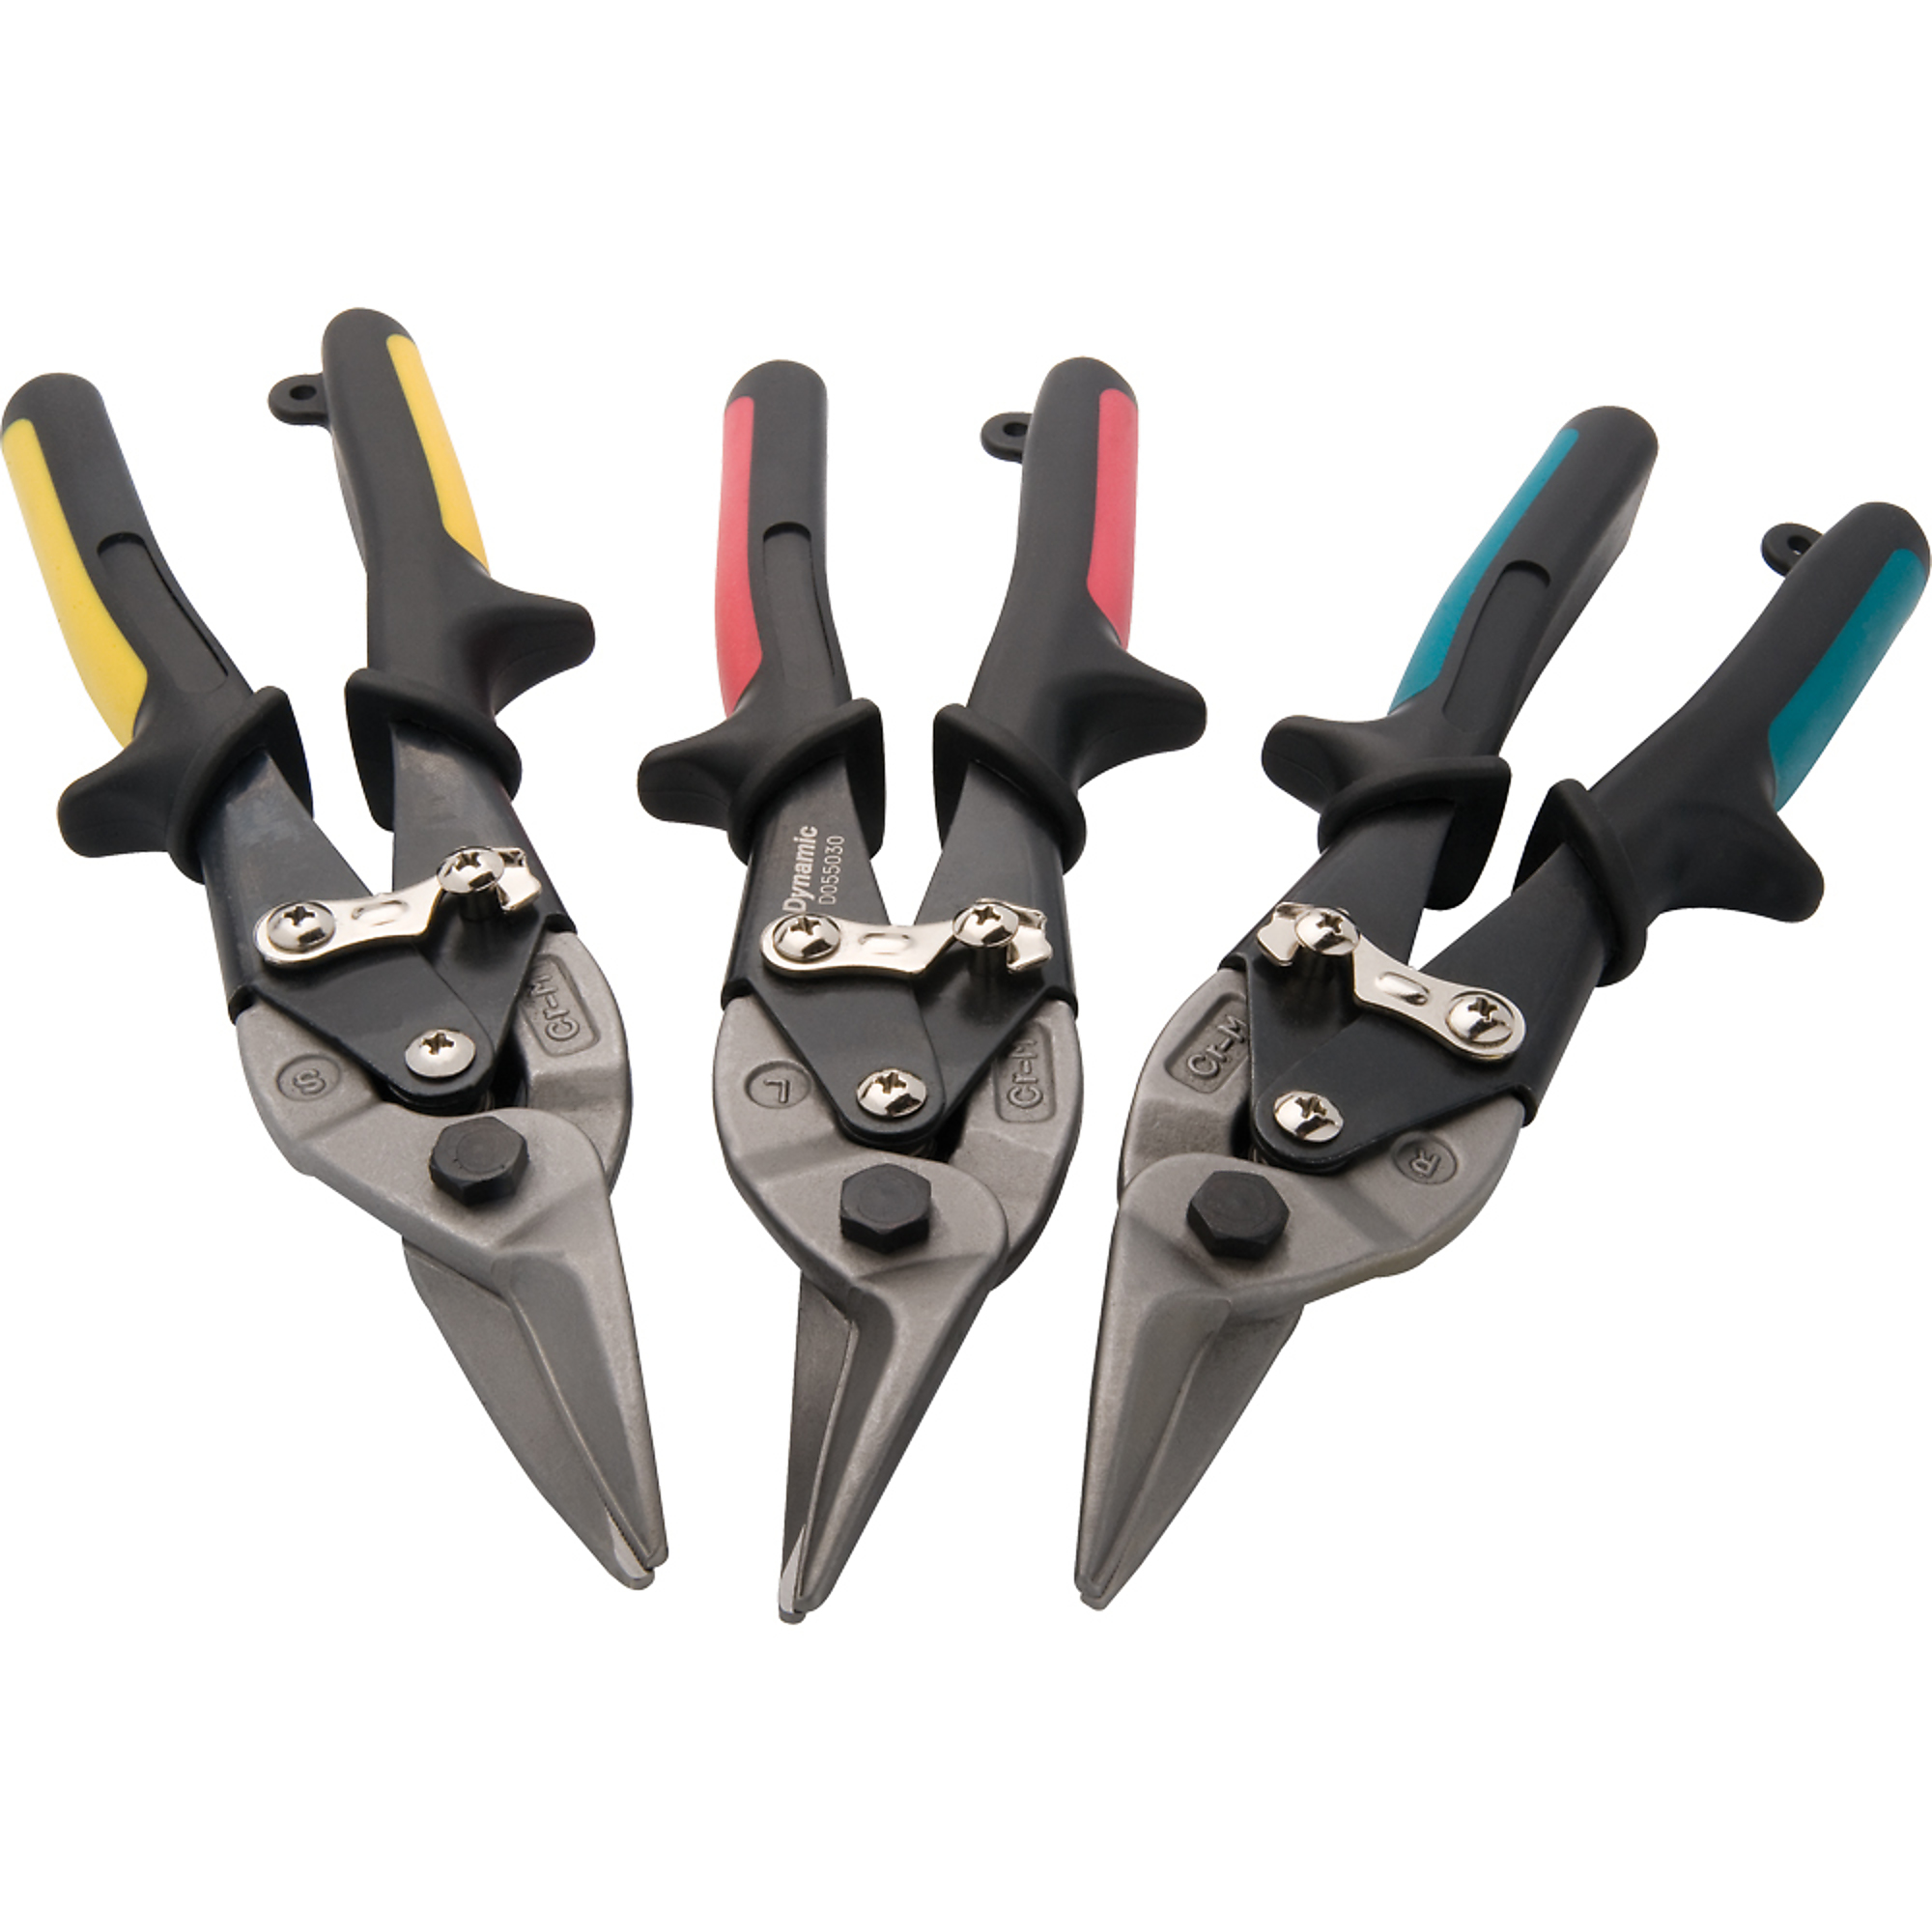 Dynamic Tools, 3 Piece Aviation Snips Set, Right/Straight/Left, Blade Size 1.75 in, Tool Length 14.5 in, Model D055205